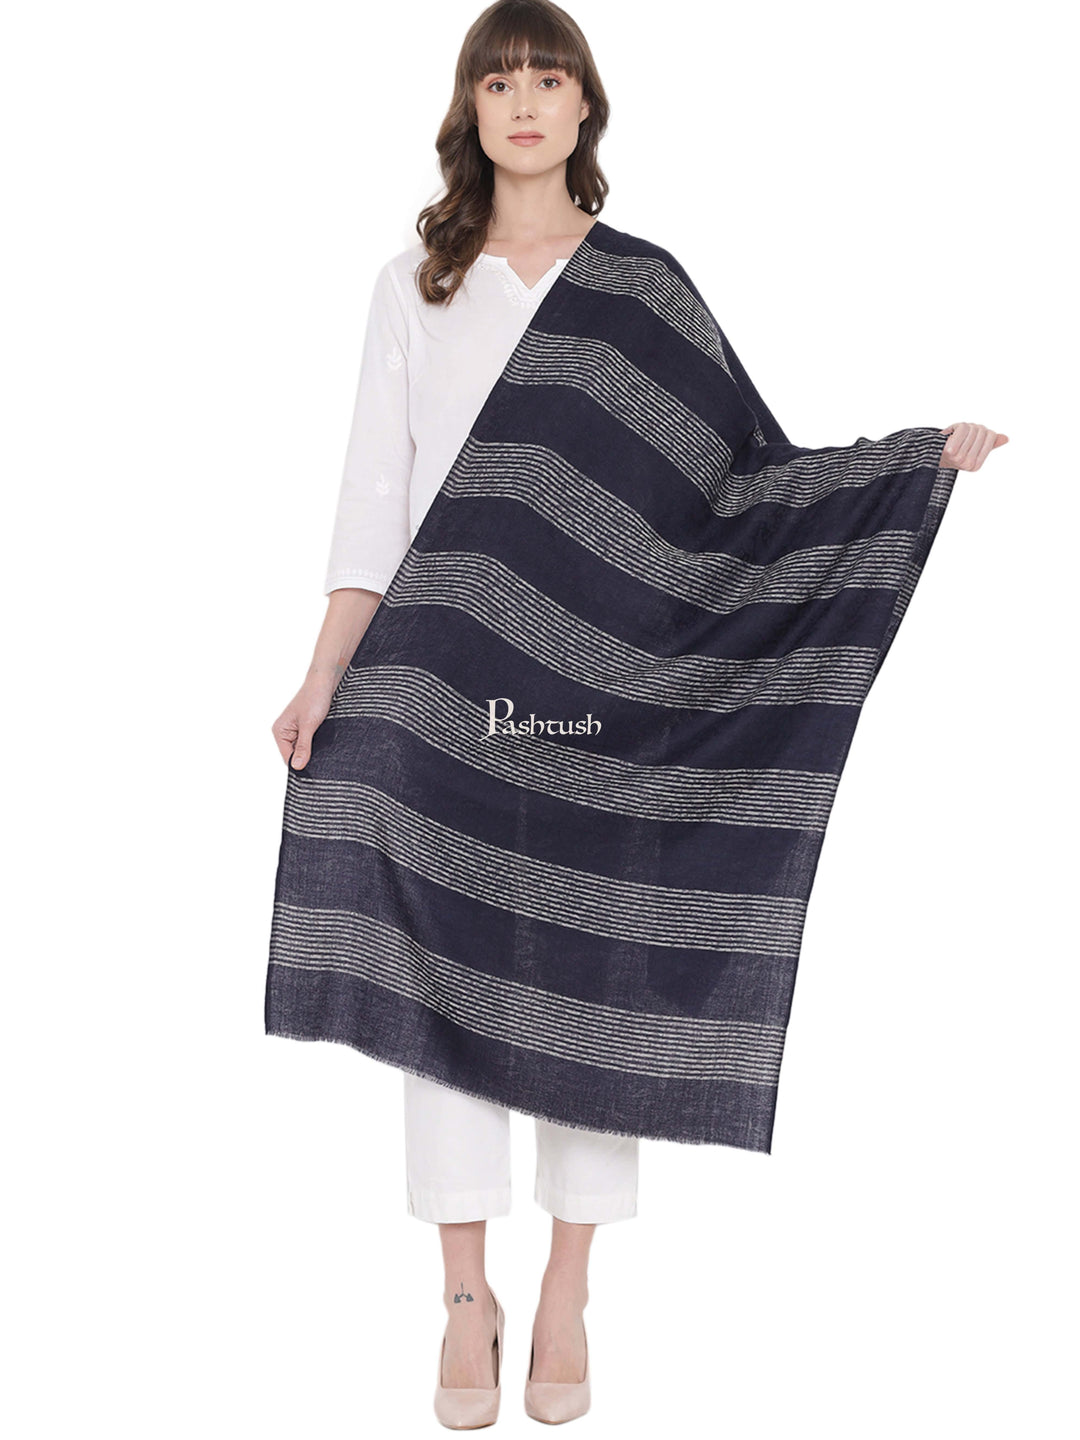 Pashtush India Womens Stoles and Scarves Scarf Pashtush Womens Self Stole, Fine Wool, Striped Weave, Navy Blue